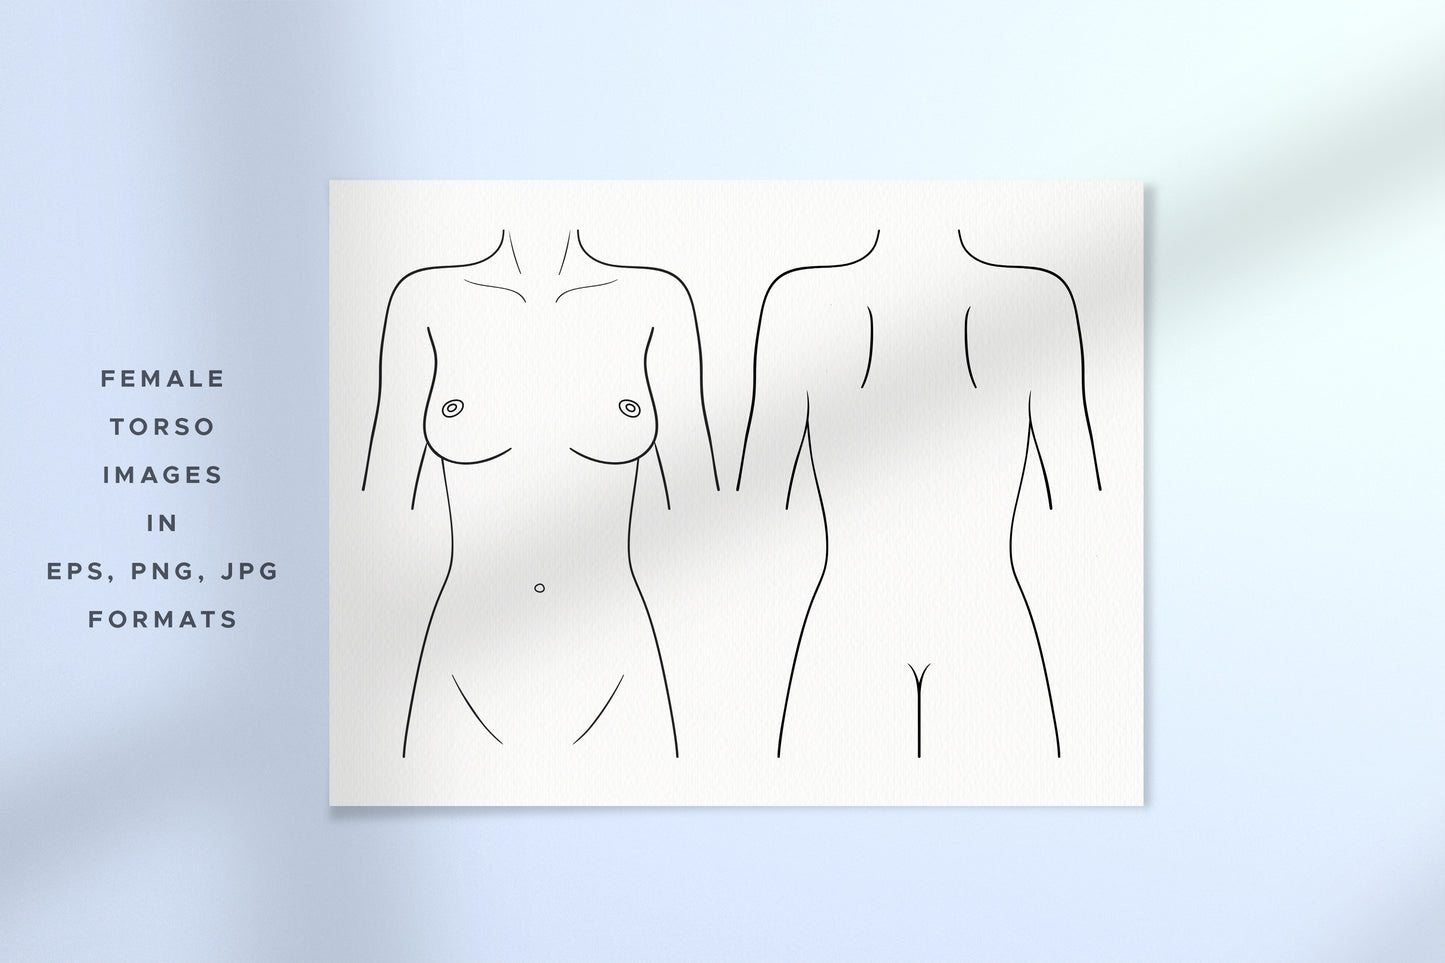 HUMAN BODY & PARTS Line Art Graphic Collection